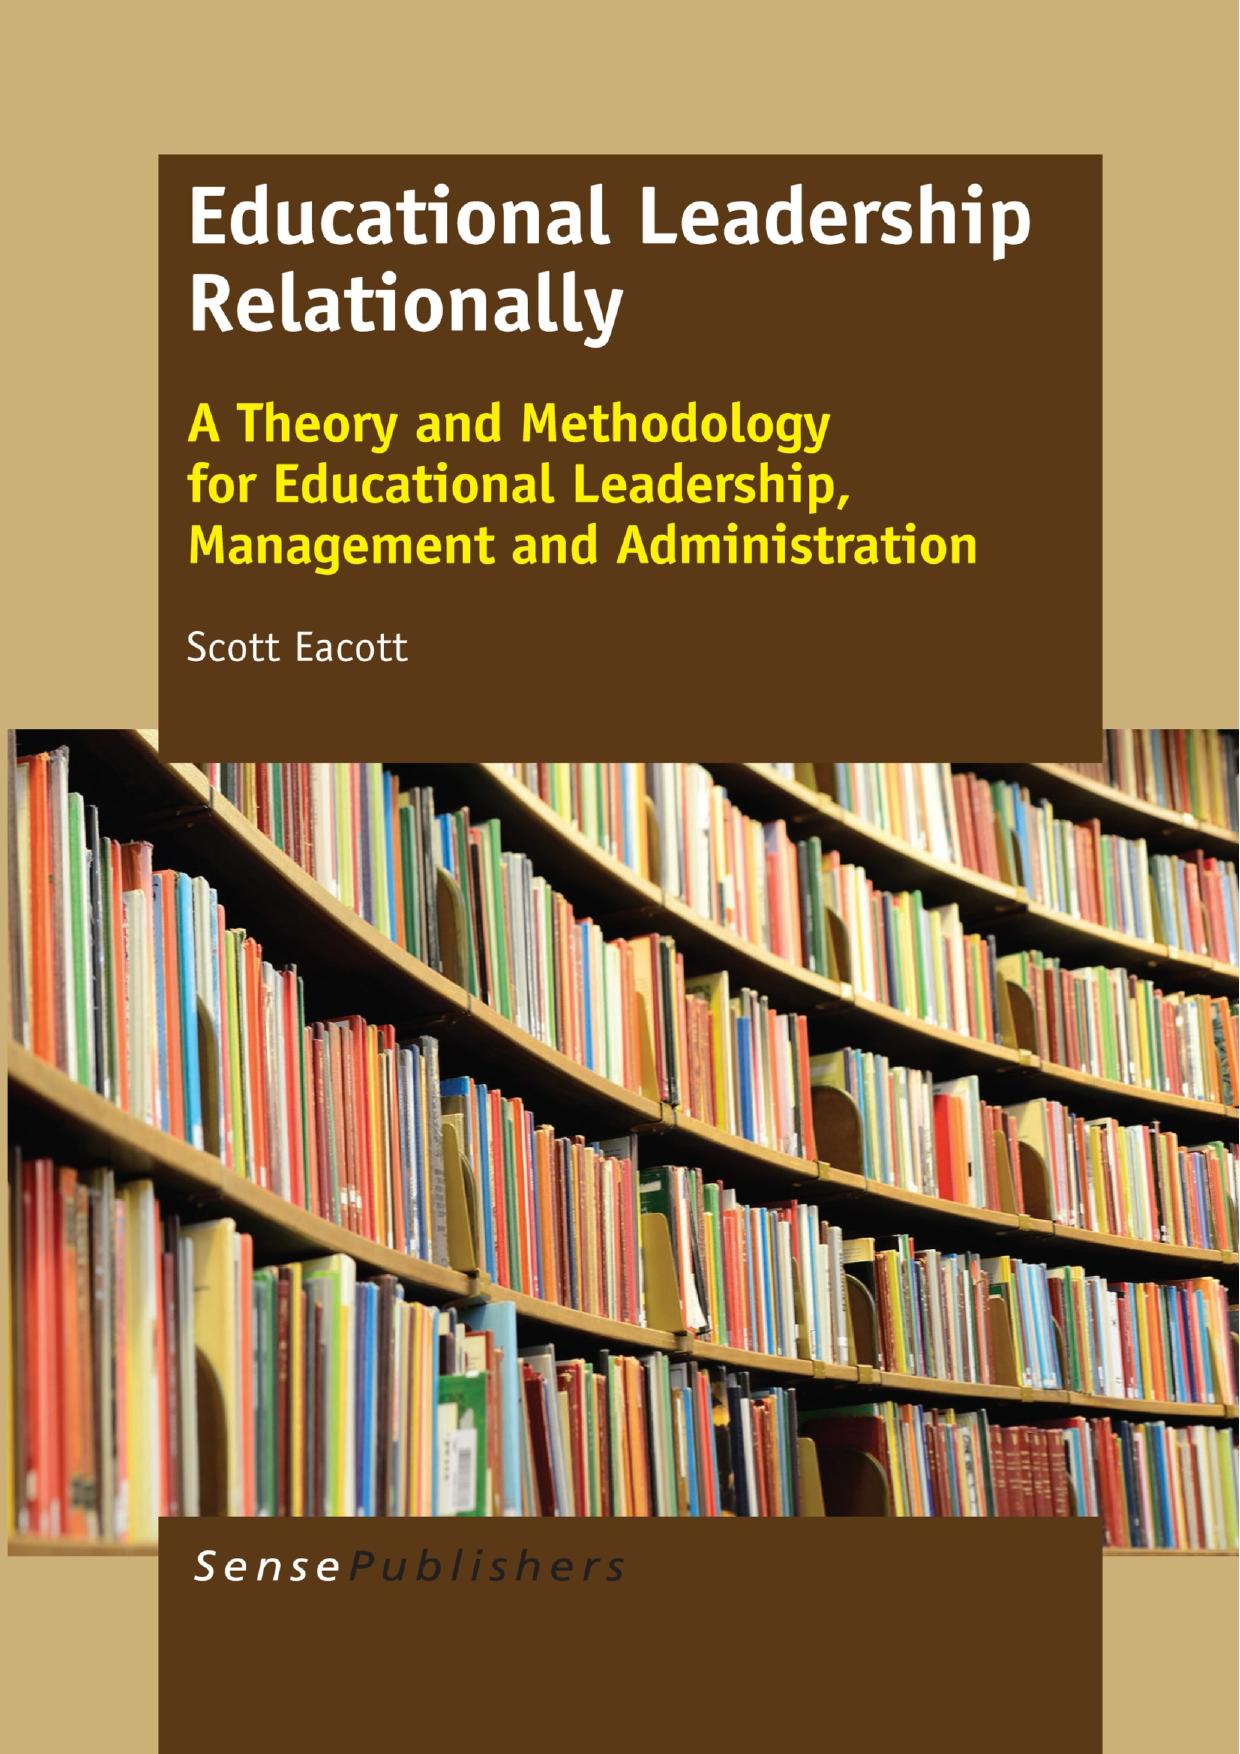 Educational Leadership Relationally A Theory and Methodology for Educational Leadership, Management and Administration 2015